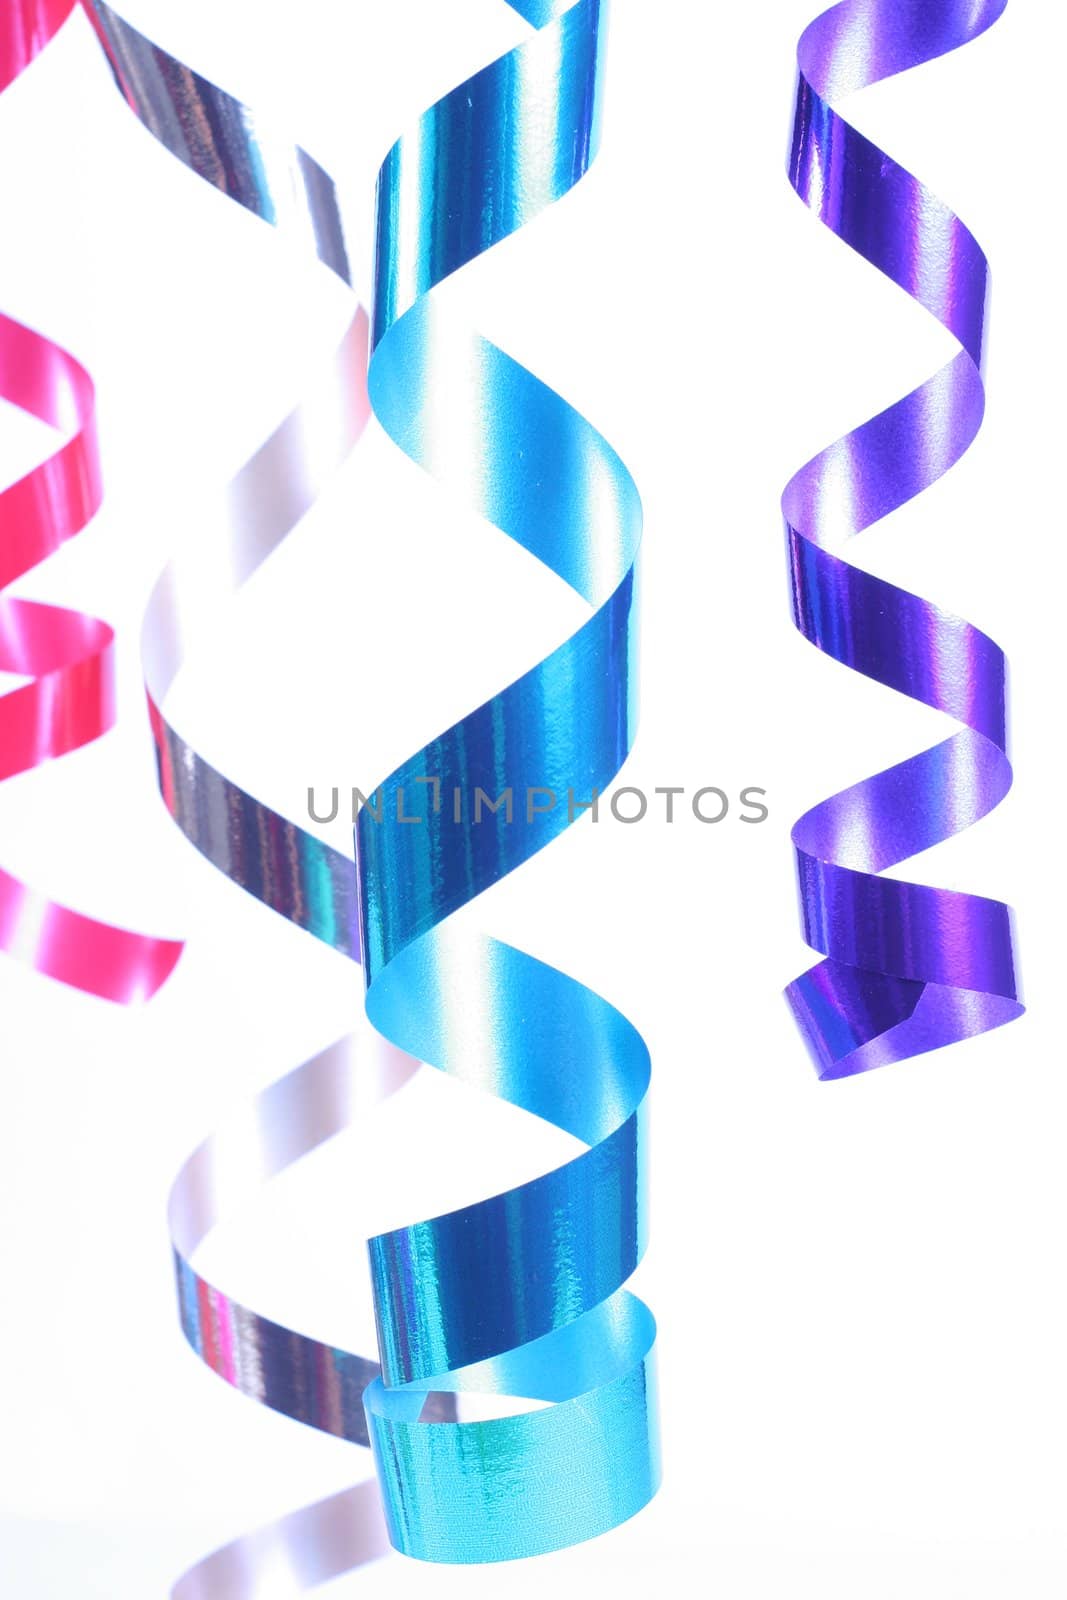 Shiny colorful satin ribbons by jarenwicklund